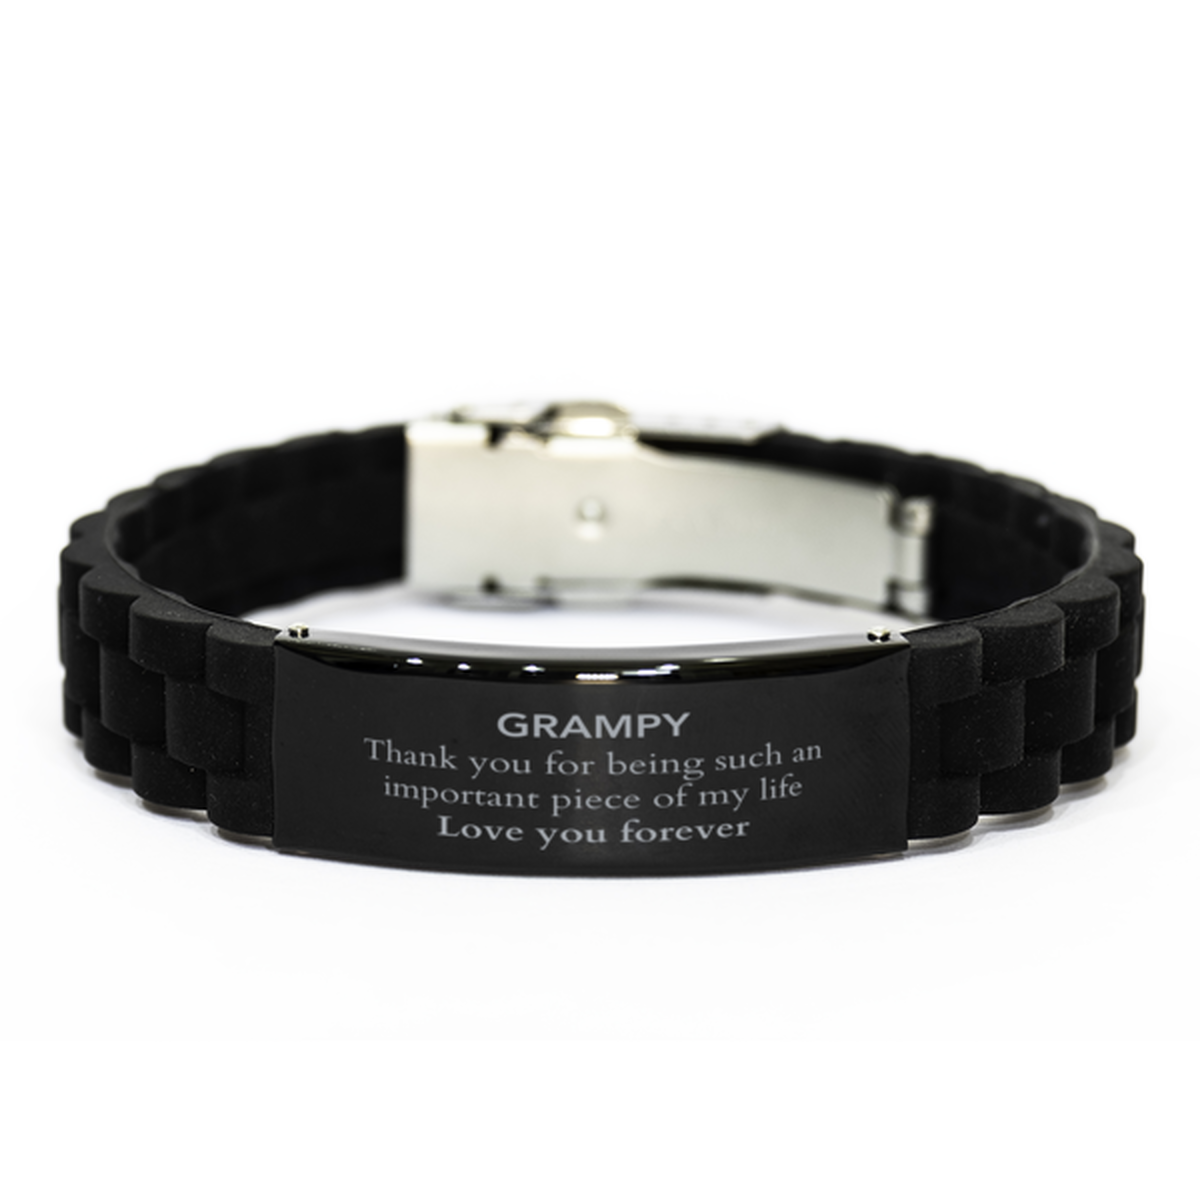 Appropriate Grampy Black Glidelock Clasp Bracelet Epic Birthday Gifts for Grampy Thank you for being such an important piece of my life Grampy Christmas Mothers Fathers Day